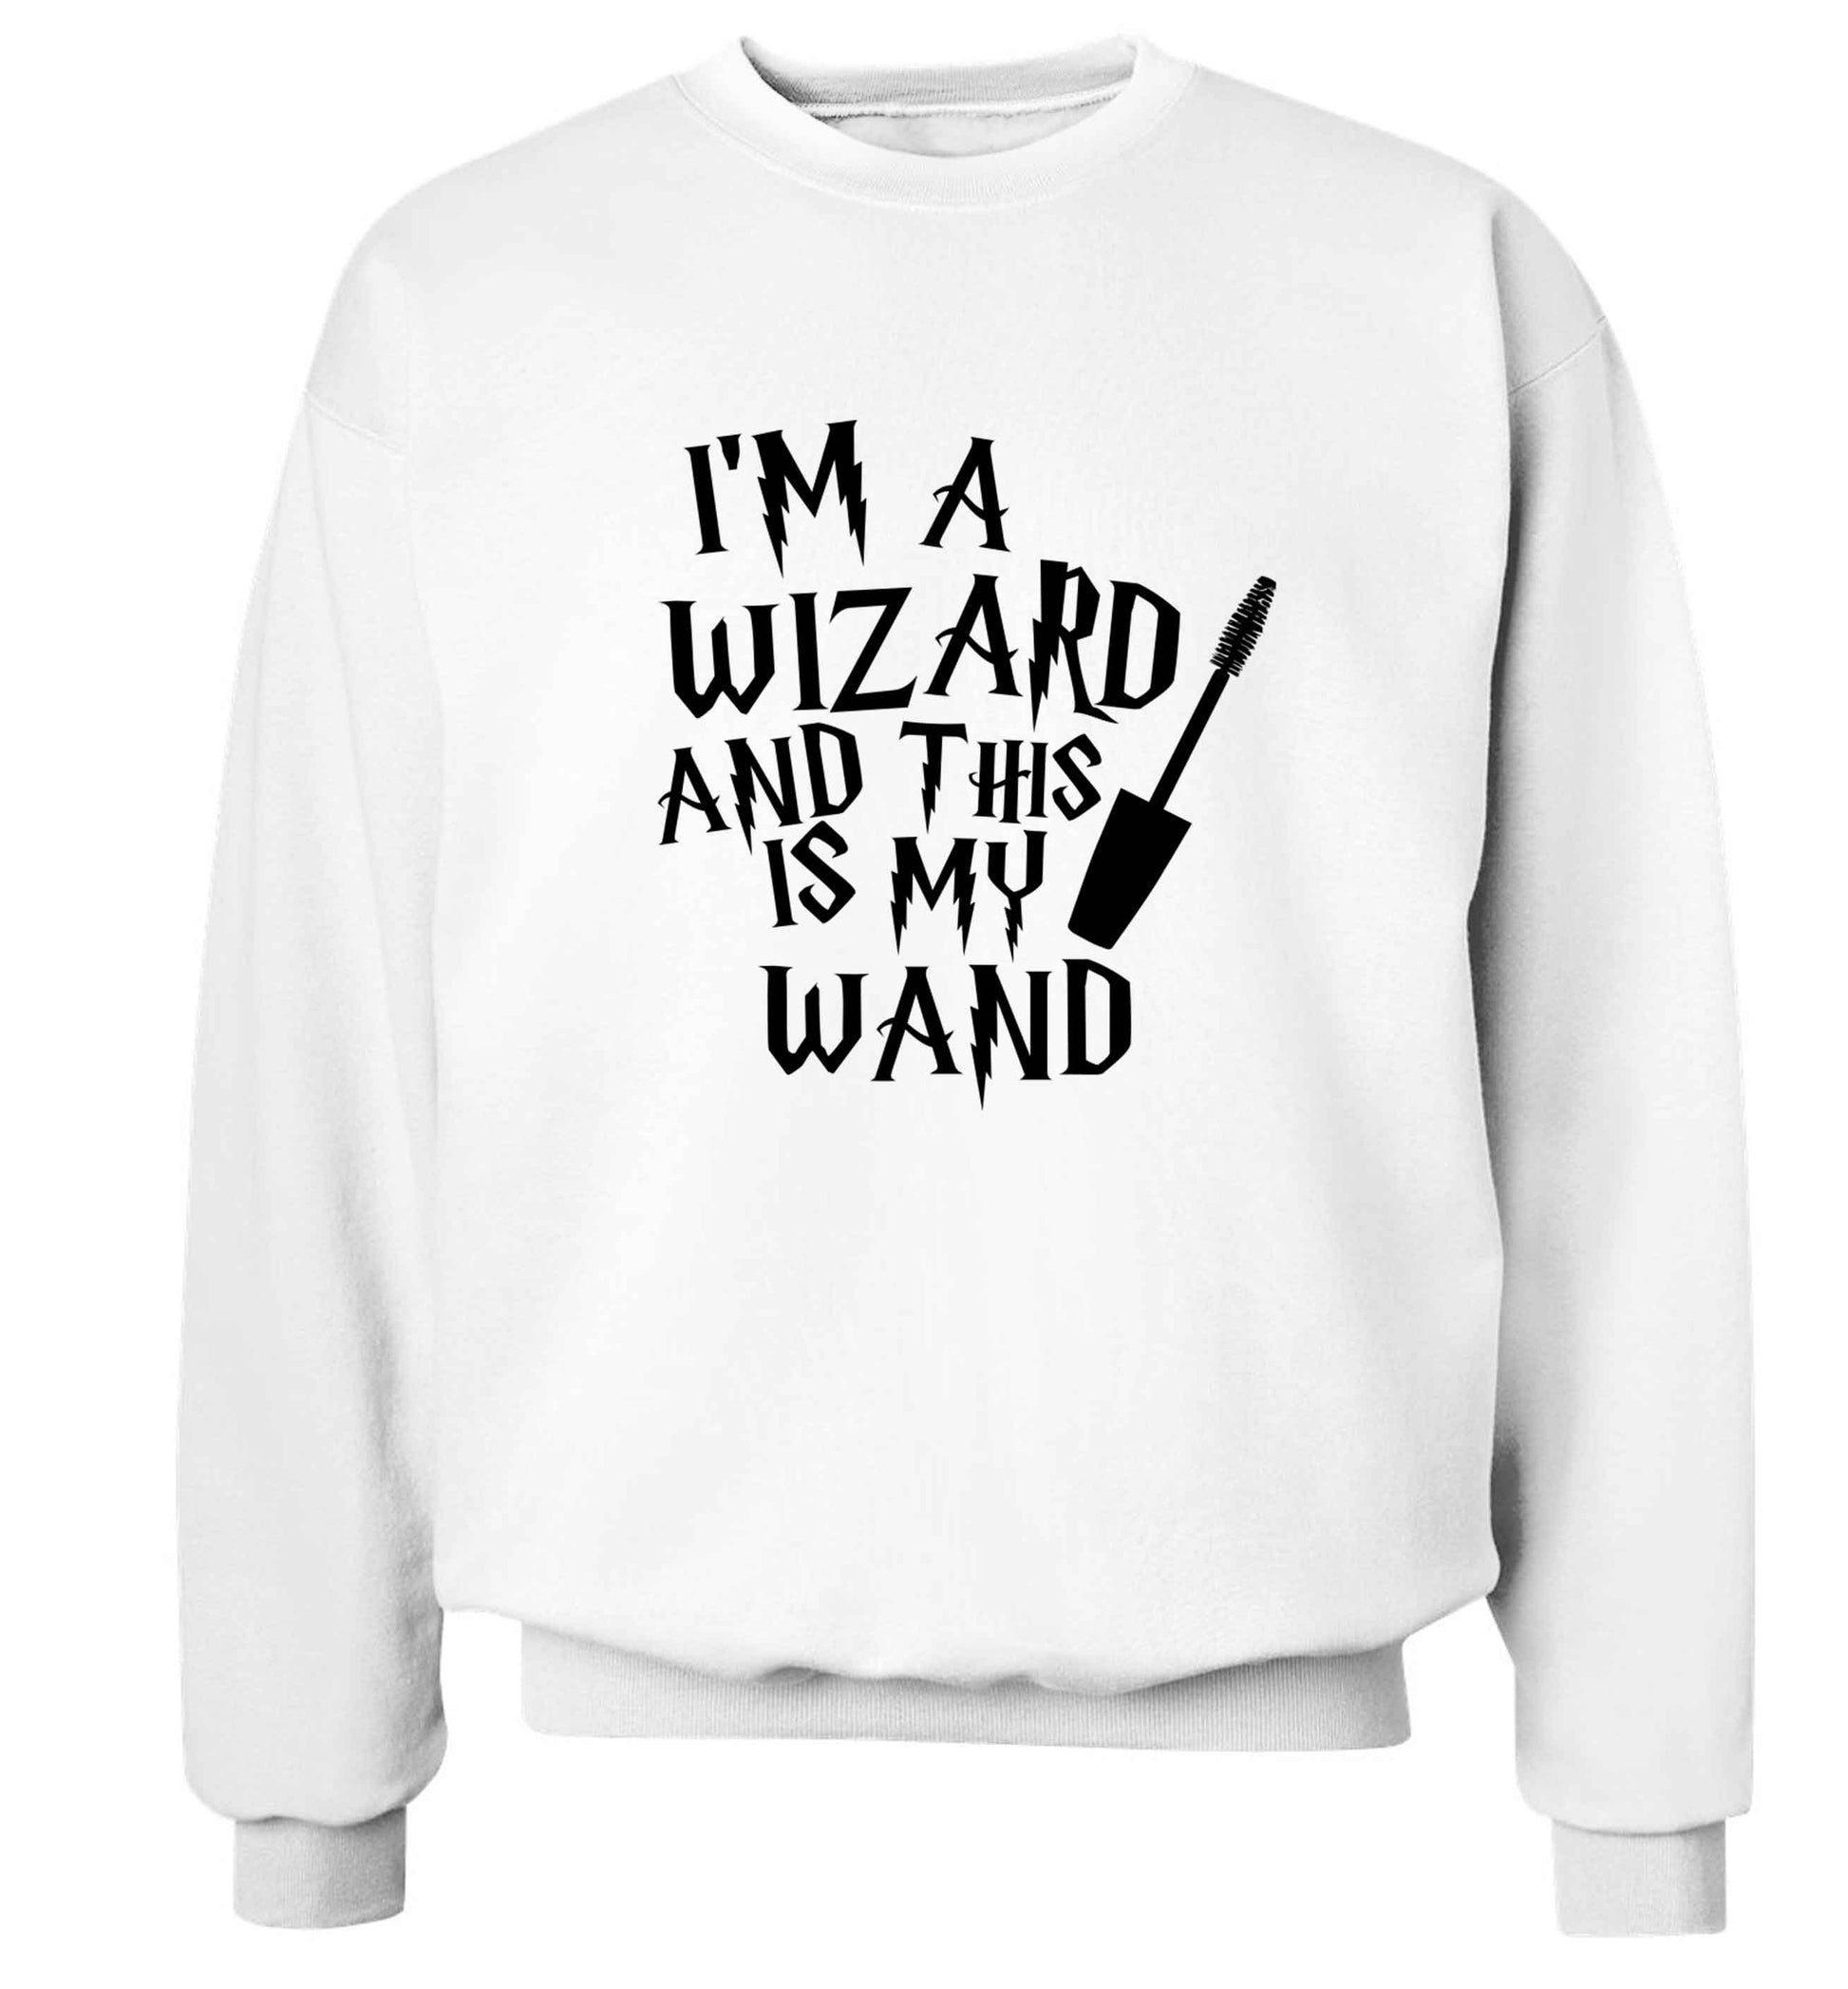 I'm a wizard and this is my wand Adult's unisex white Sweater 2XL